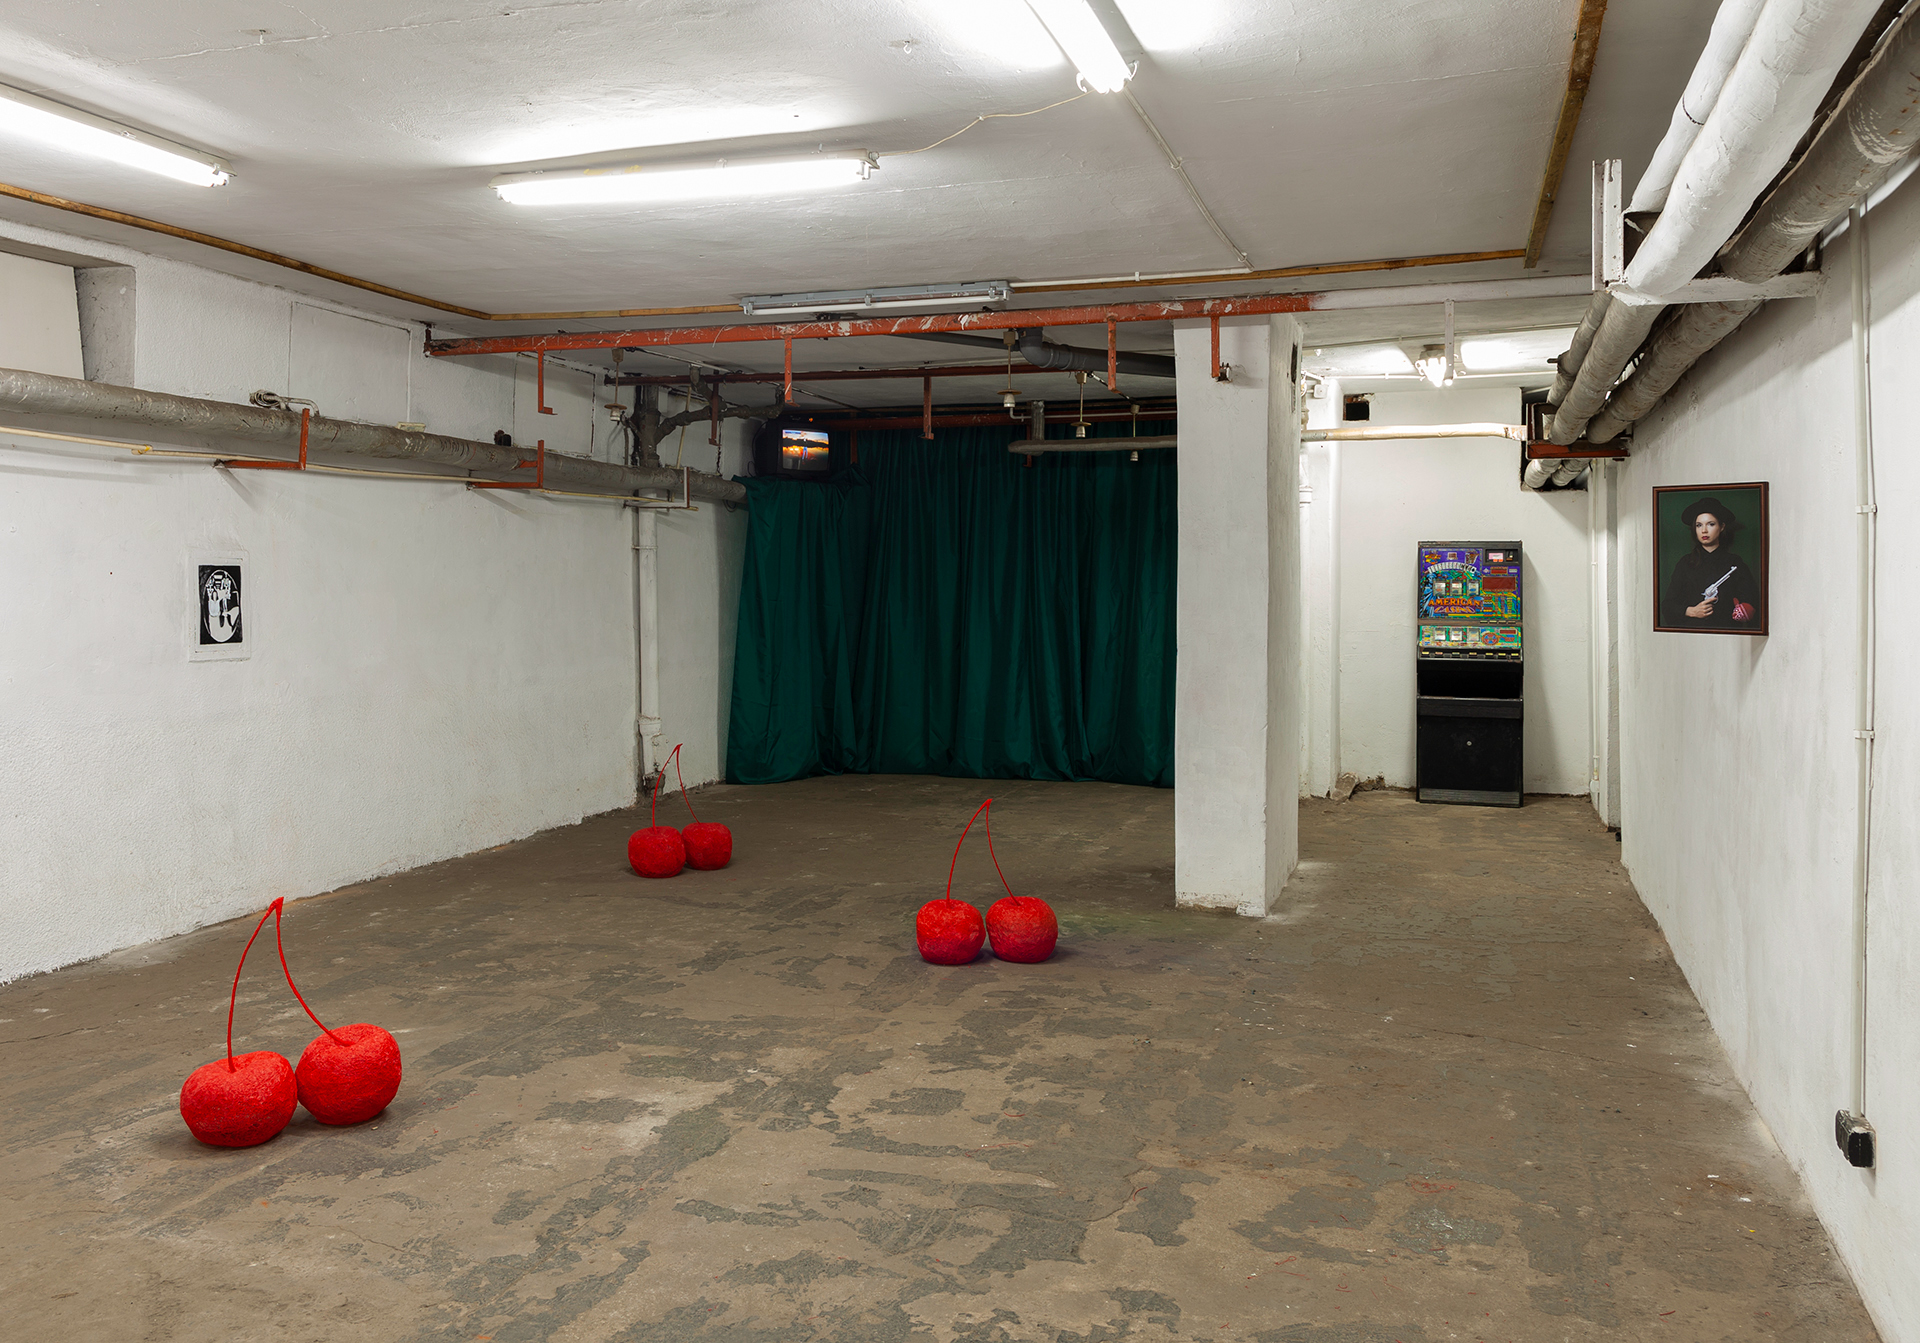 In the image there is an interior in a basement with no windows. Scattered through the middle of the space are three sets of oversized red cherries, much like the ones in slot machines. Behind them, towards the back of the room is a dark green curtain. At the top left corner of the curtain is a TV, presenting a video containing a sunset. Yet the TV is far away from the camera and small. On the right side of the curtain, against a white wall is a slot machine. On the wall next to the machine, the one that in perspective is coming closer to the camera, somewhere mid-way across the space is a photo of a white woman dressed in a black hat, holding a revolver, with a red bandana on the end of her arm - around the elbow. She is portrayed on a dark green background. Across the room, on the wall on the other side of the cherries, there is a small black and white image of a couple. The room has additional visible elements typical for basement spaces such as pipes crossing the room near the ceiling.